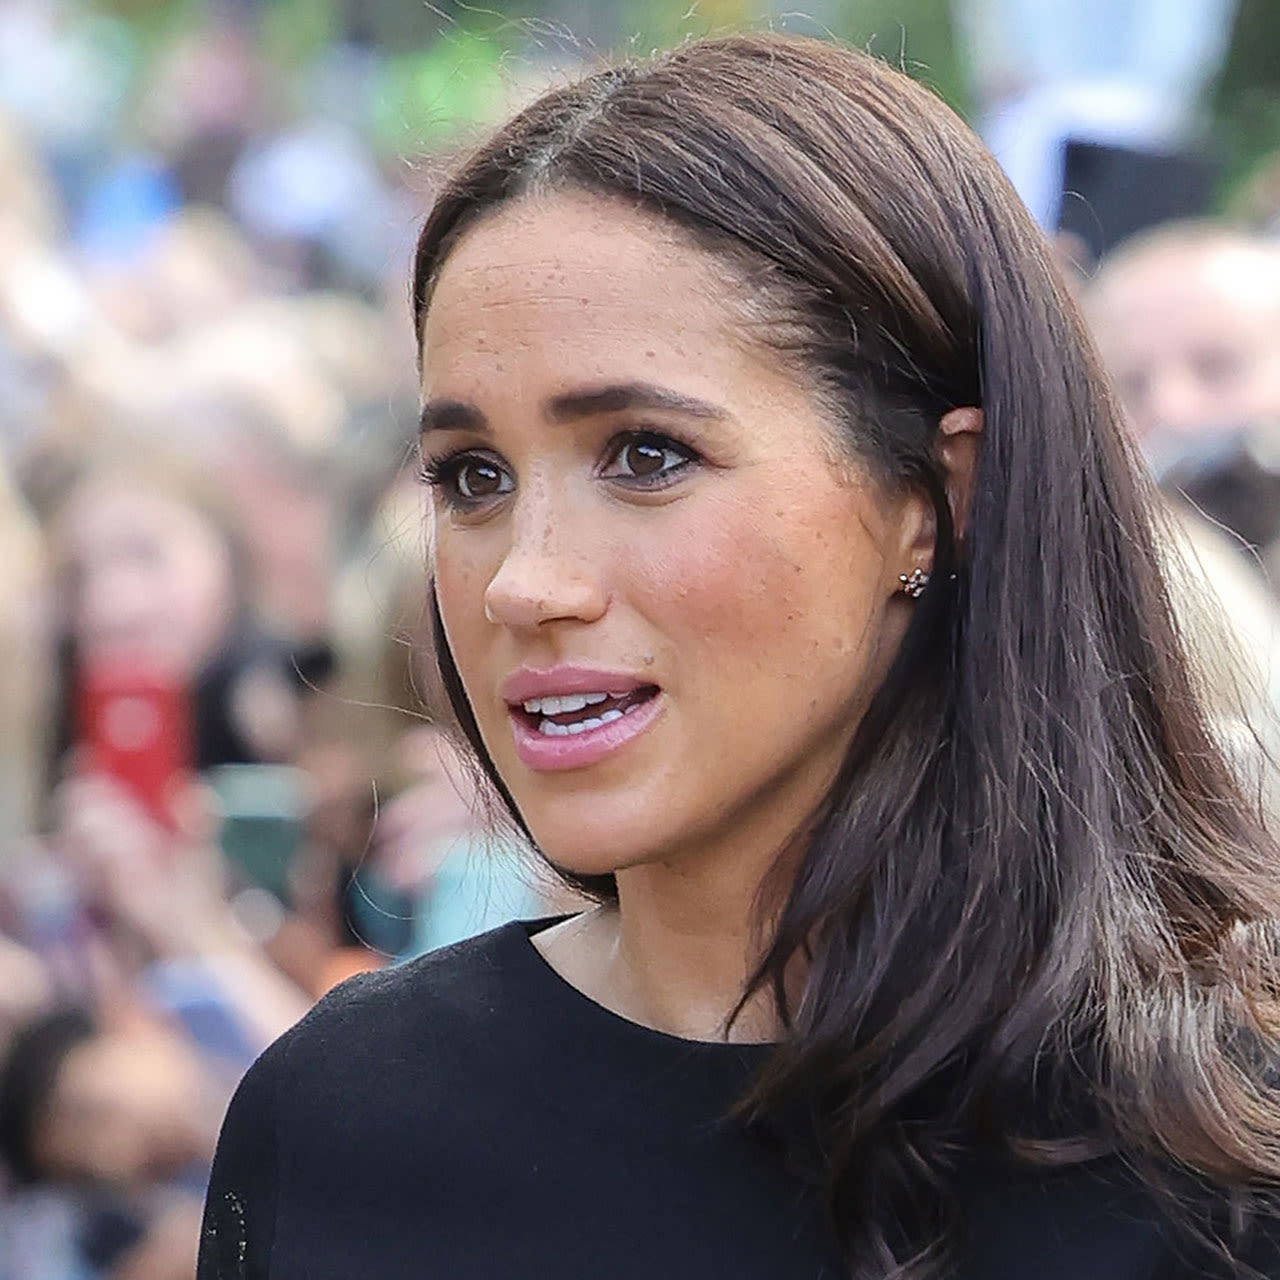 Meghan Markle Was Reportedly ‘In Tears’ When Her ‘Ridiculous’ Lifestyle Brand Was ‘Mocked’: ‘She Feels People Are Unfairly...